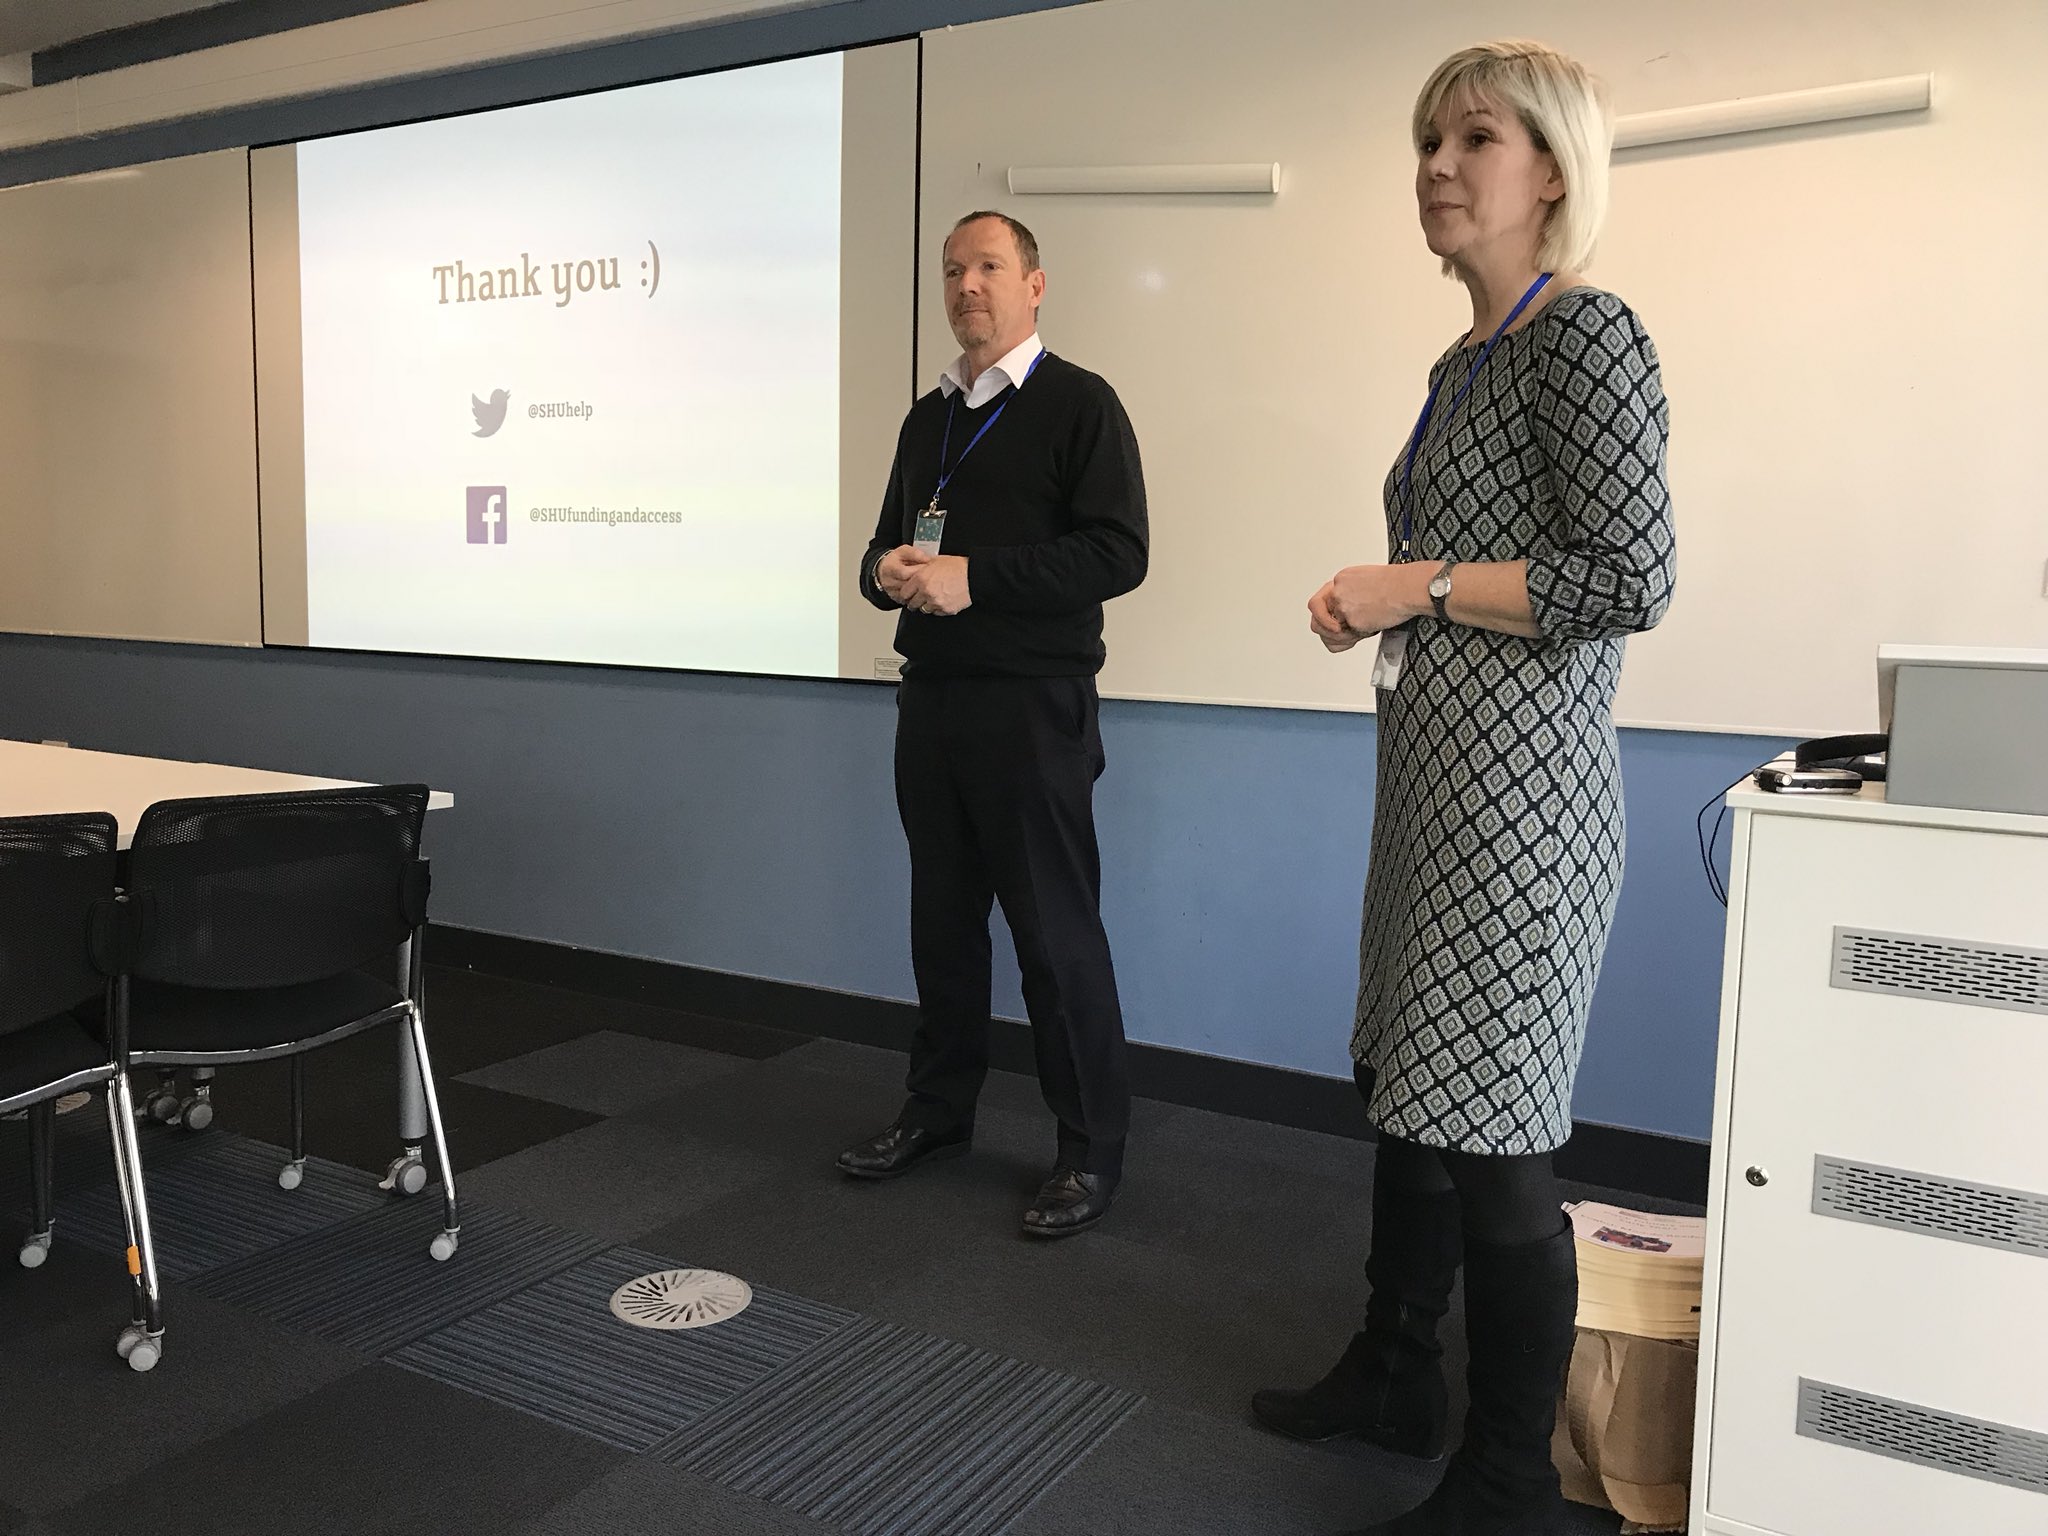 Tim Mulroy and Monika Foster talk about using social media to support the transition of part time students and students from FE into HE #SocMedHE17 https://t.co/9sEI0myUsV